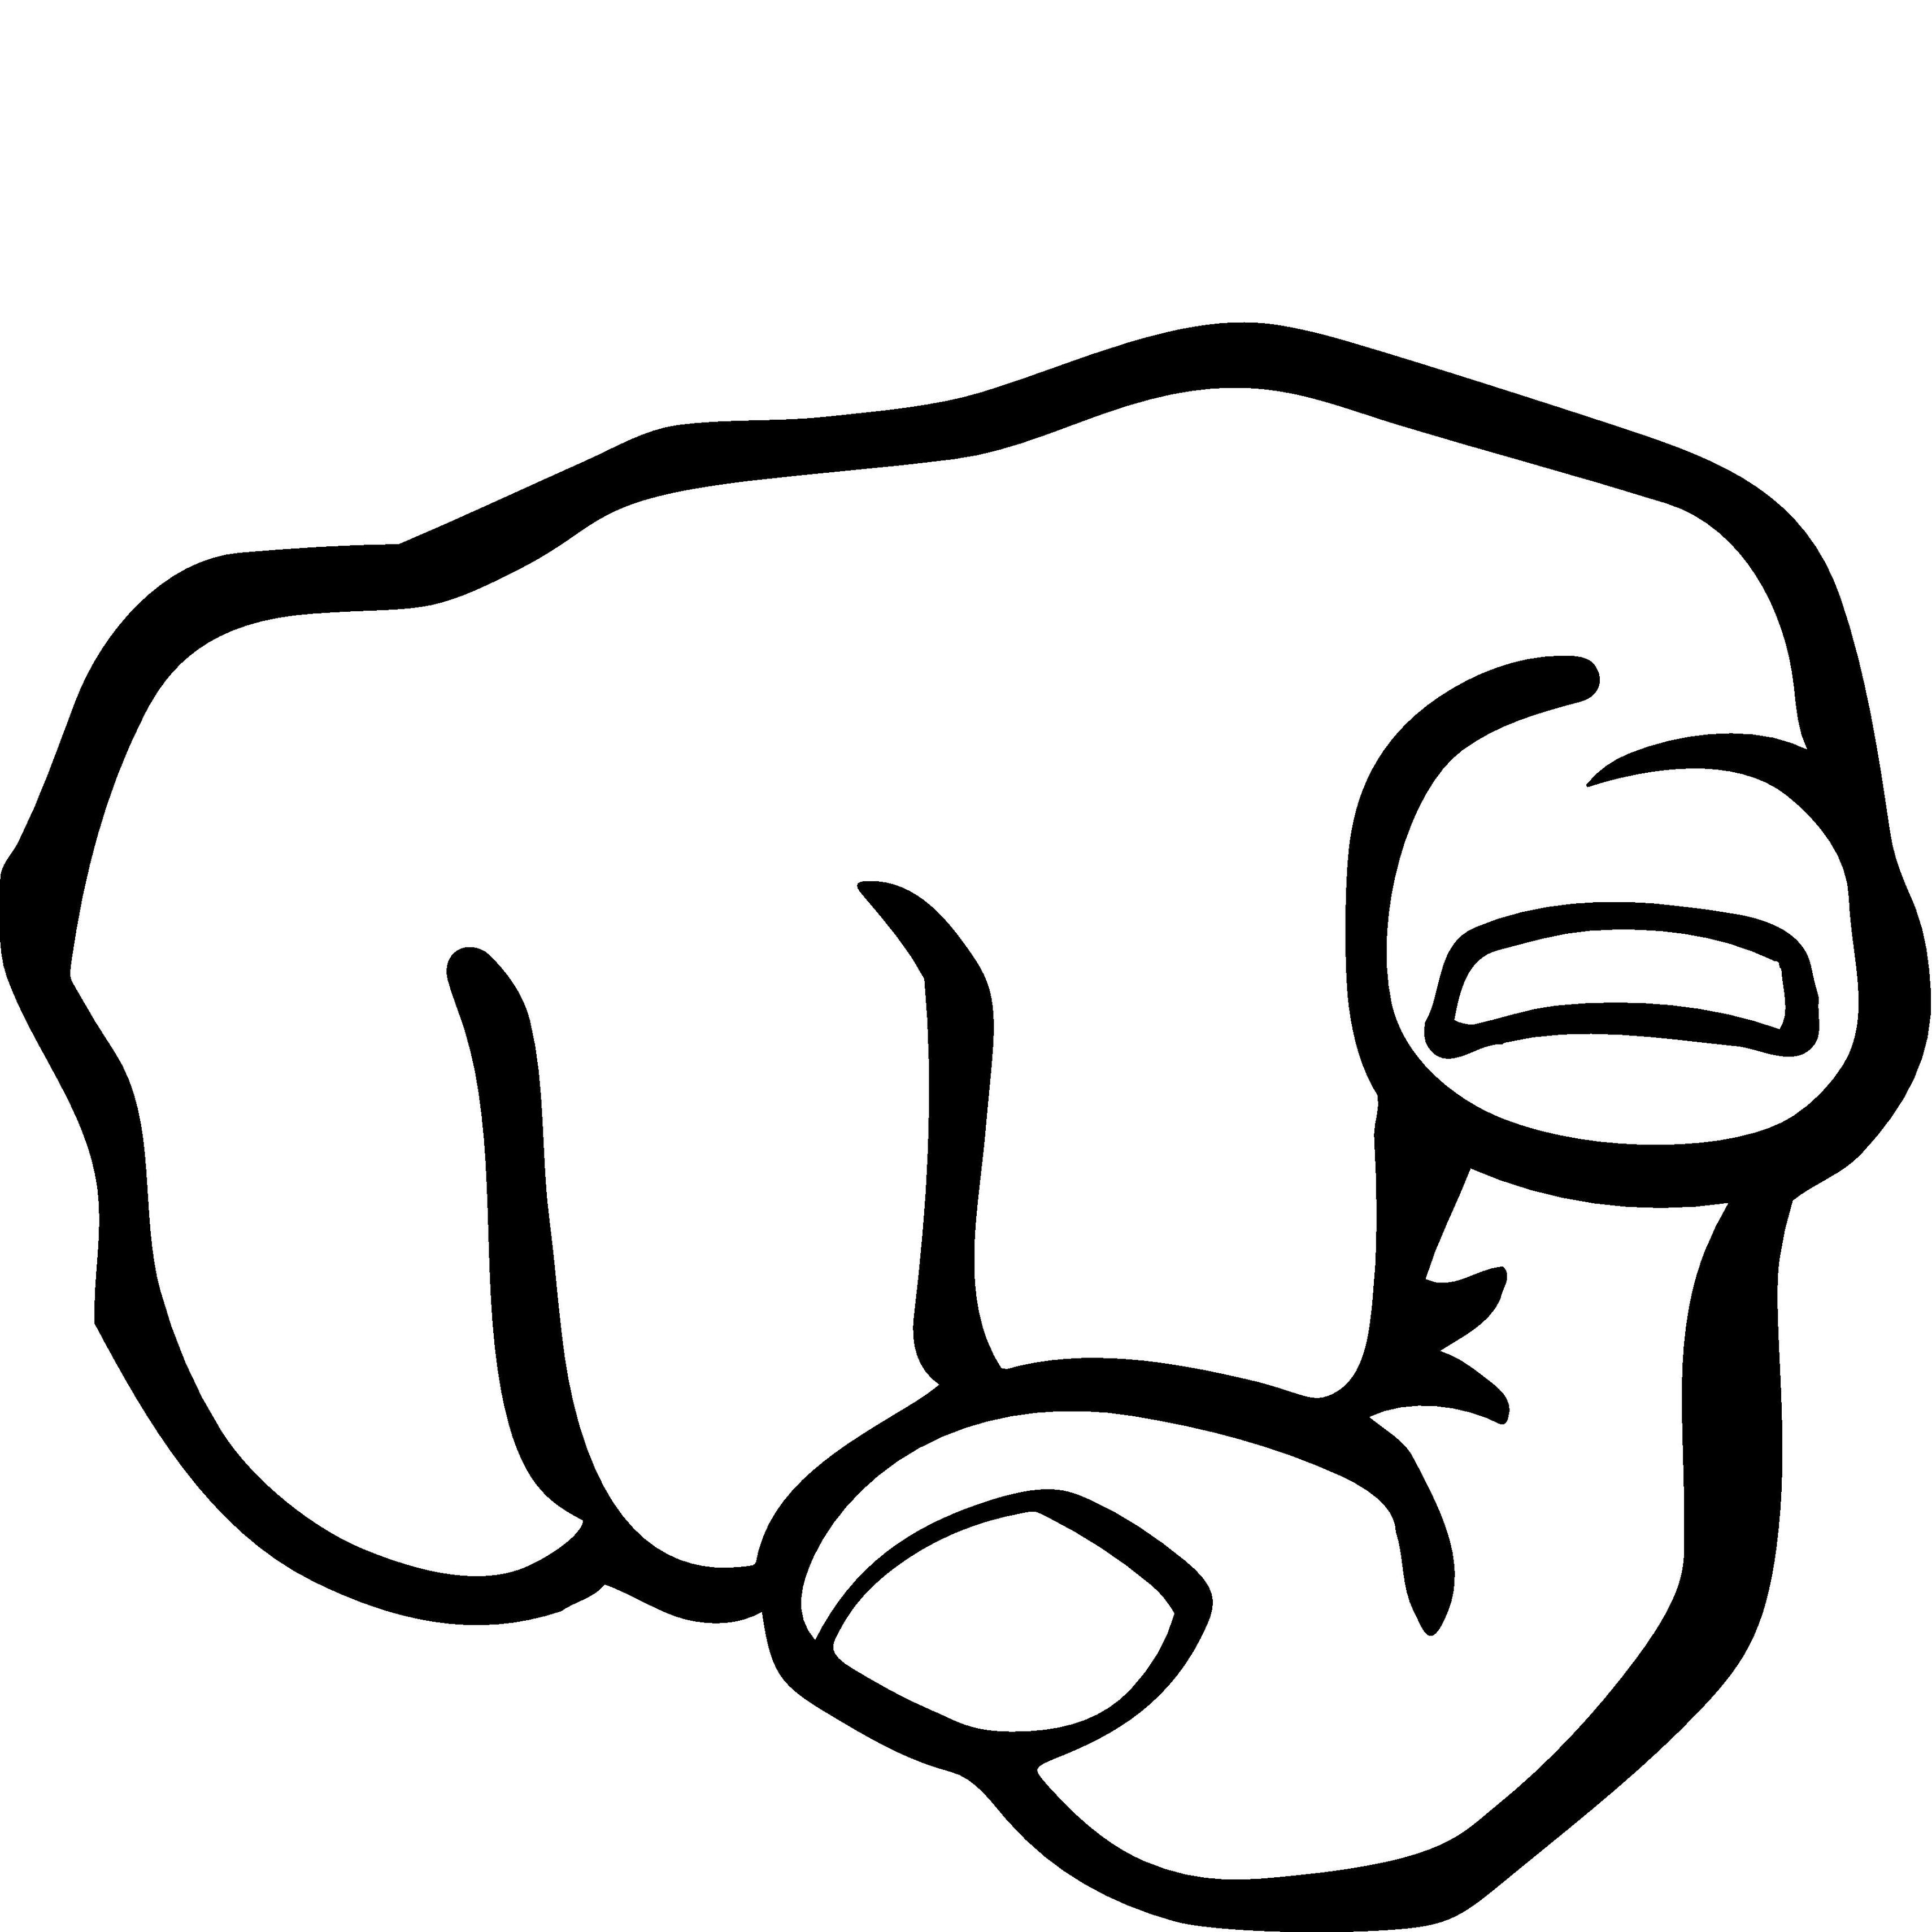 Pointing Finger Without Shade Clipart - Free to use Clip Art Resource